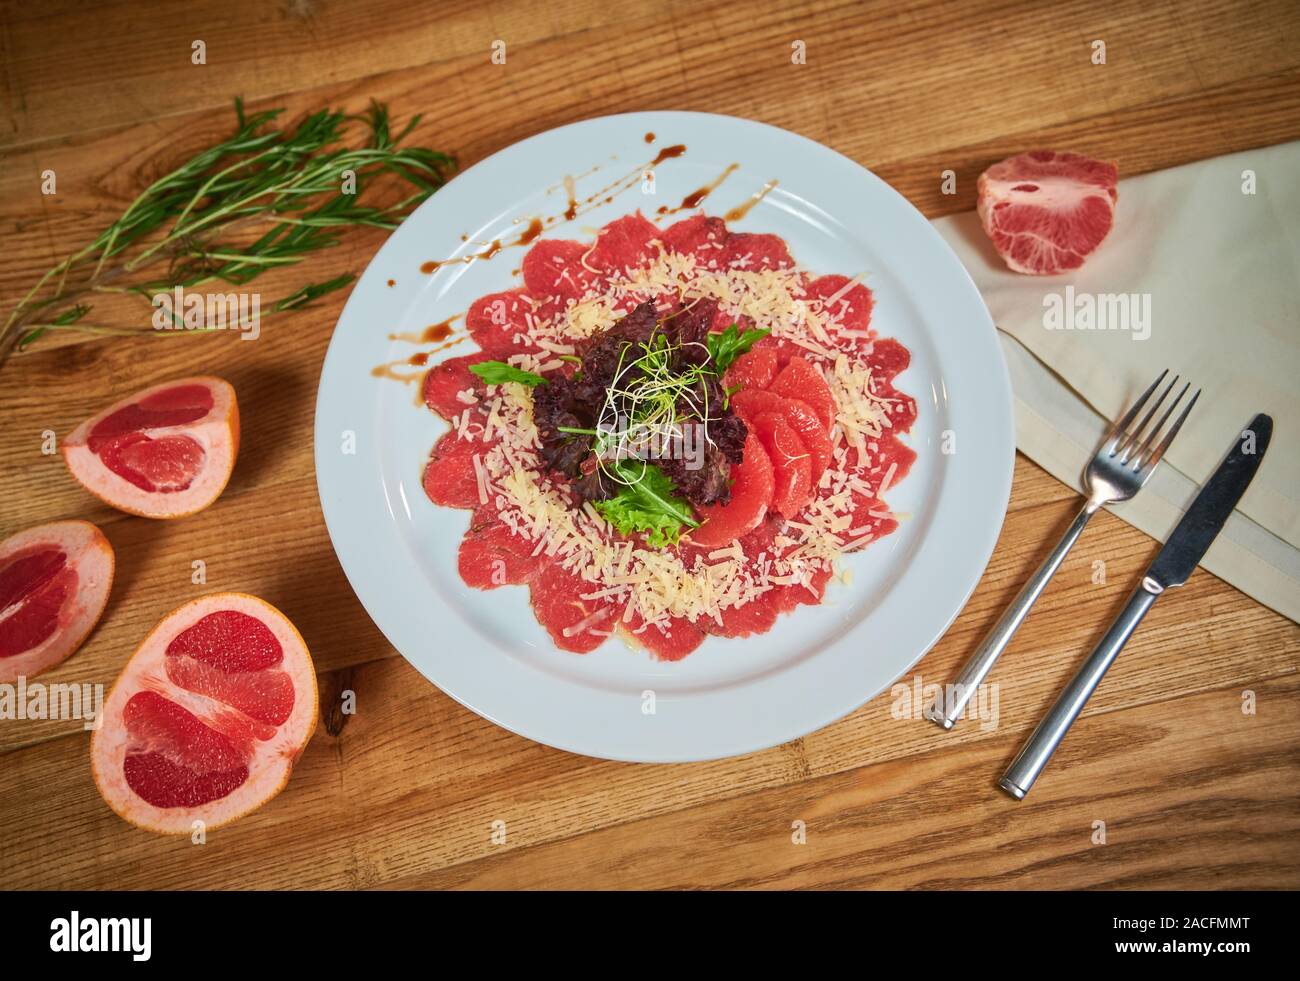 Beef carpaccio with grapefruit and lettuce. Arrangement with cutlery Stock Photo